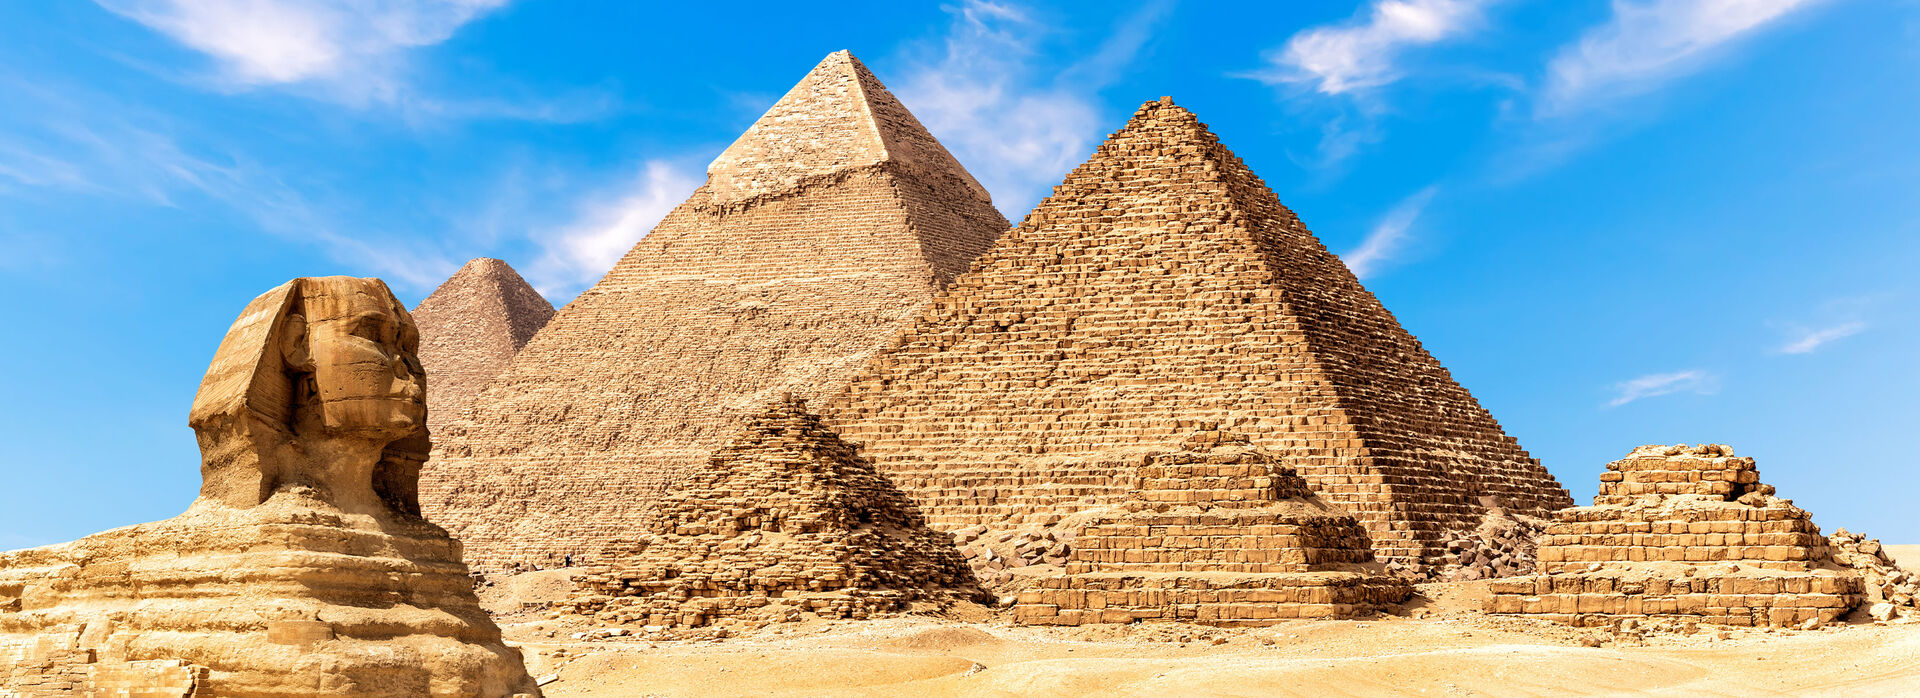 Pyramids and Sphinx 3300x12000